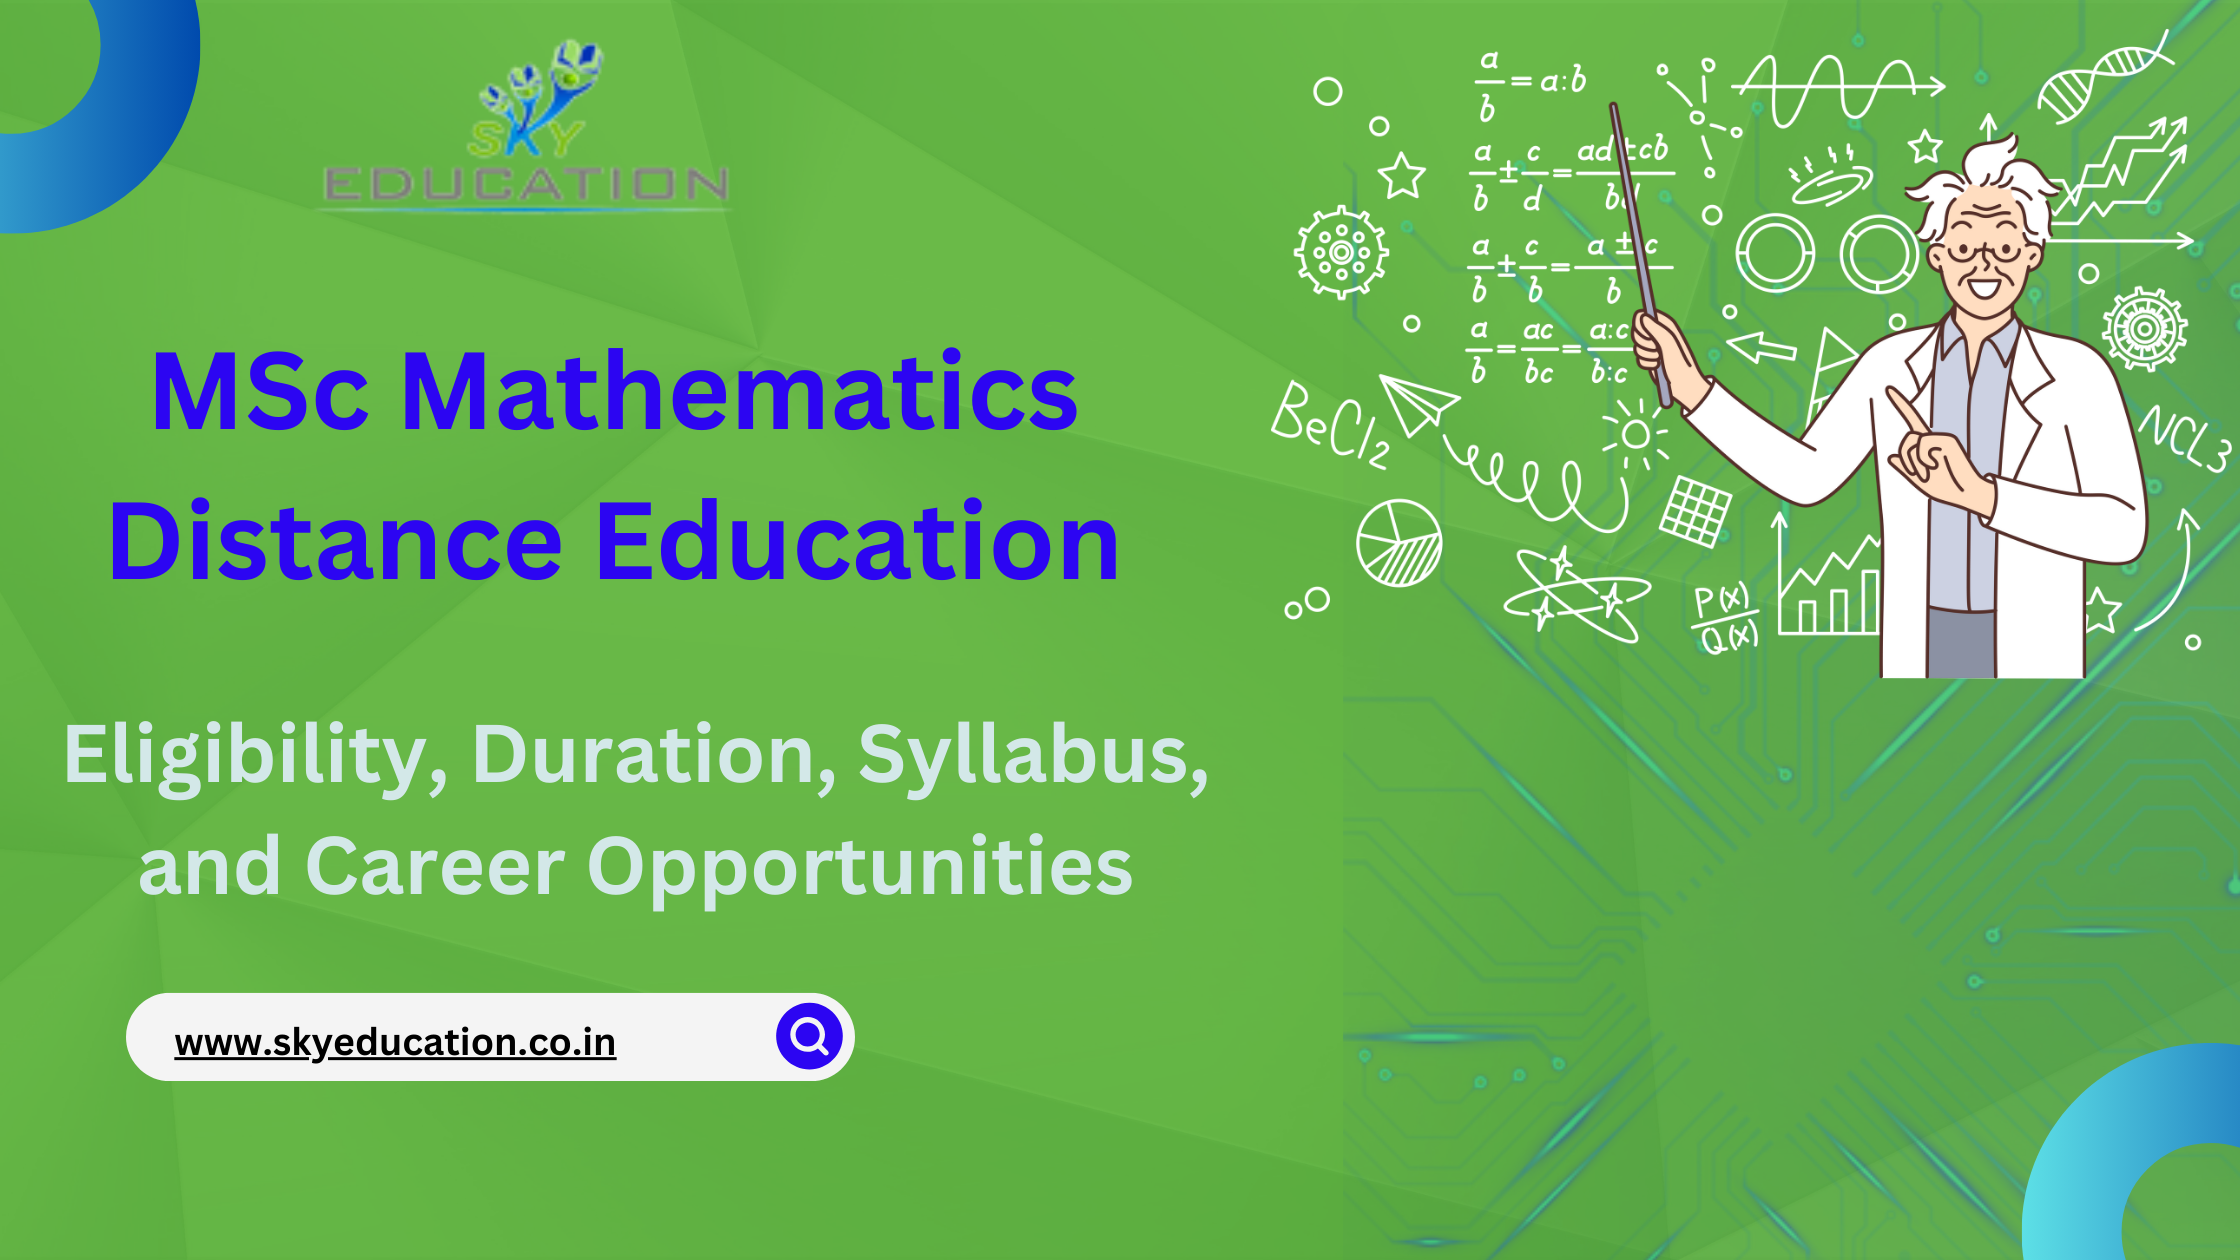 MSc Mathematics Distance Education - Admission, Eligibility, and Career Prospects 'photo